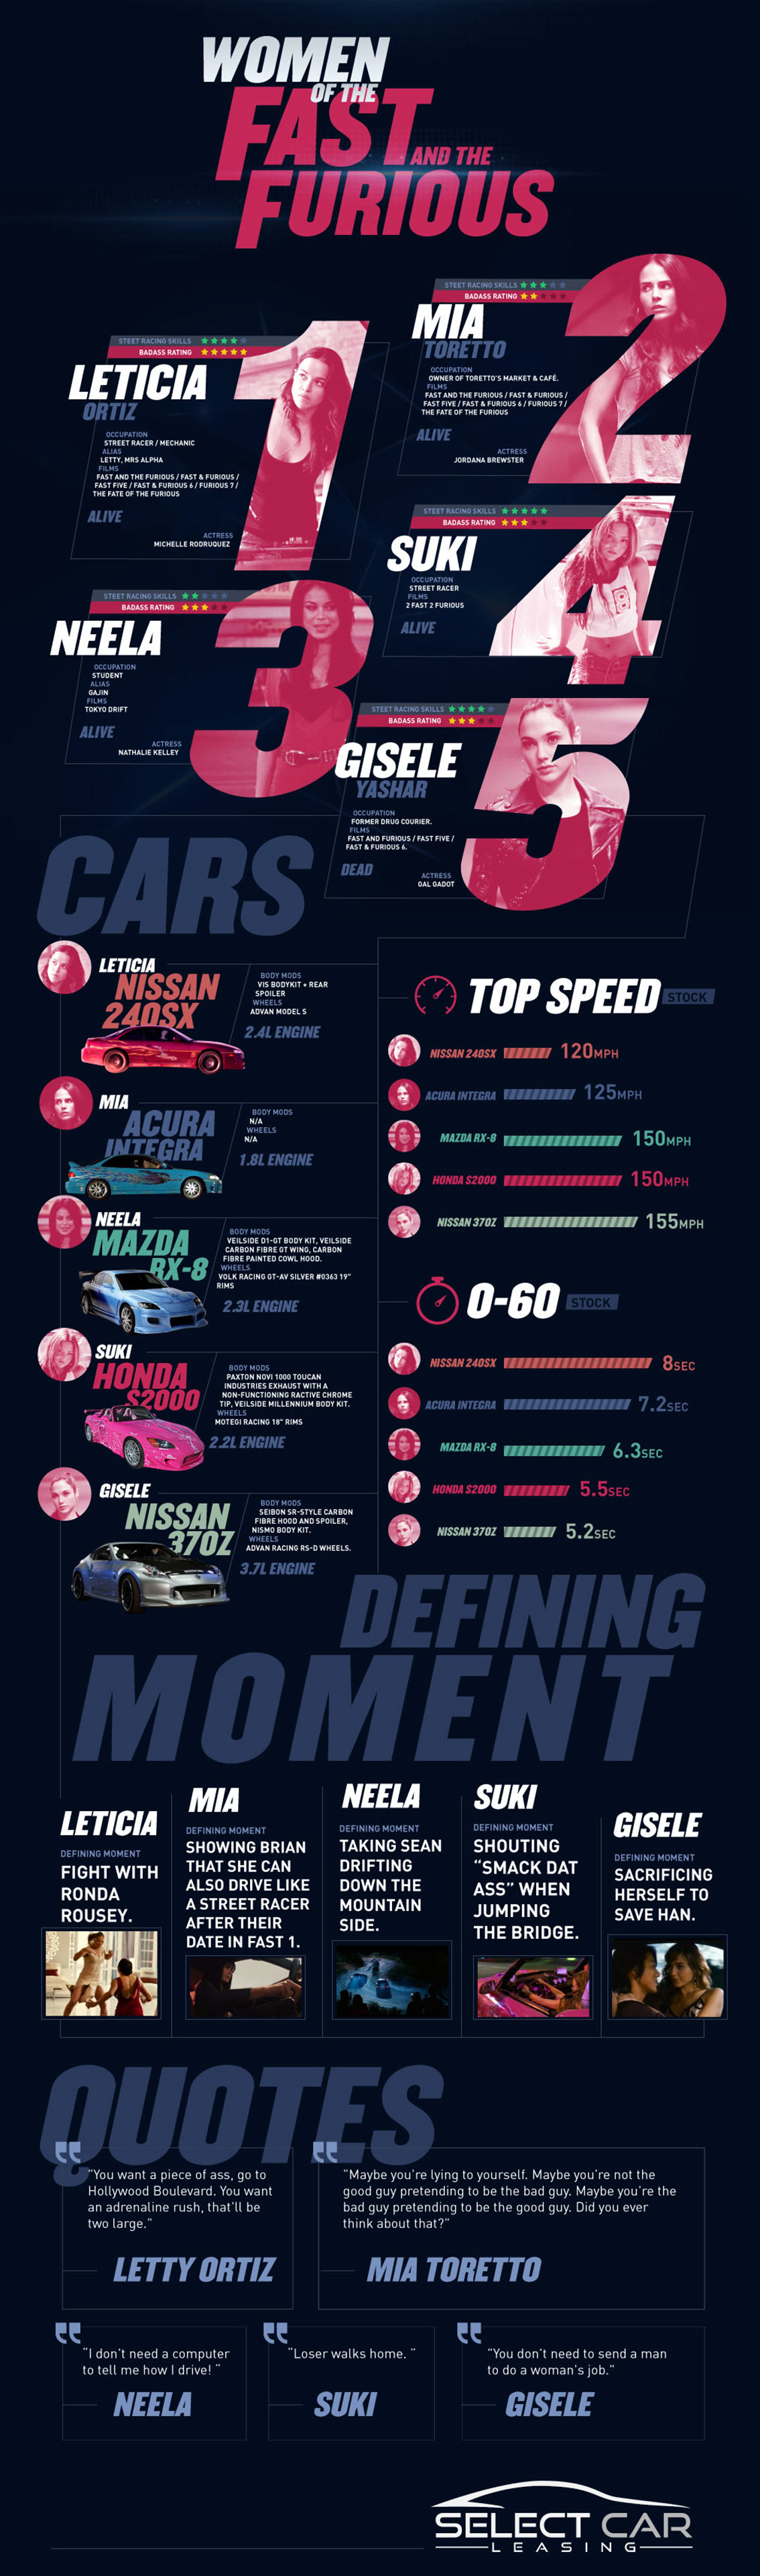 The Fast and the Furious: Female Casts [Infographic]1134 x 3846